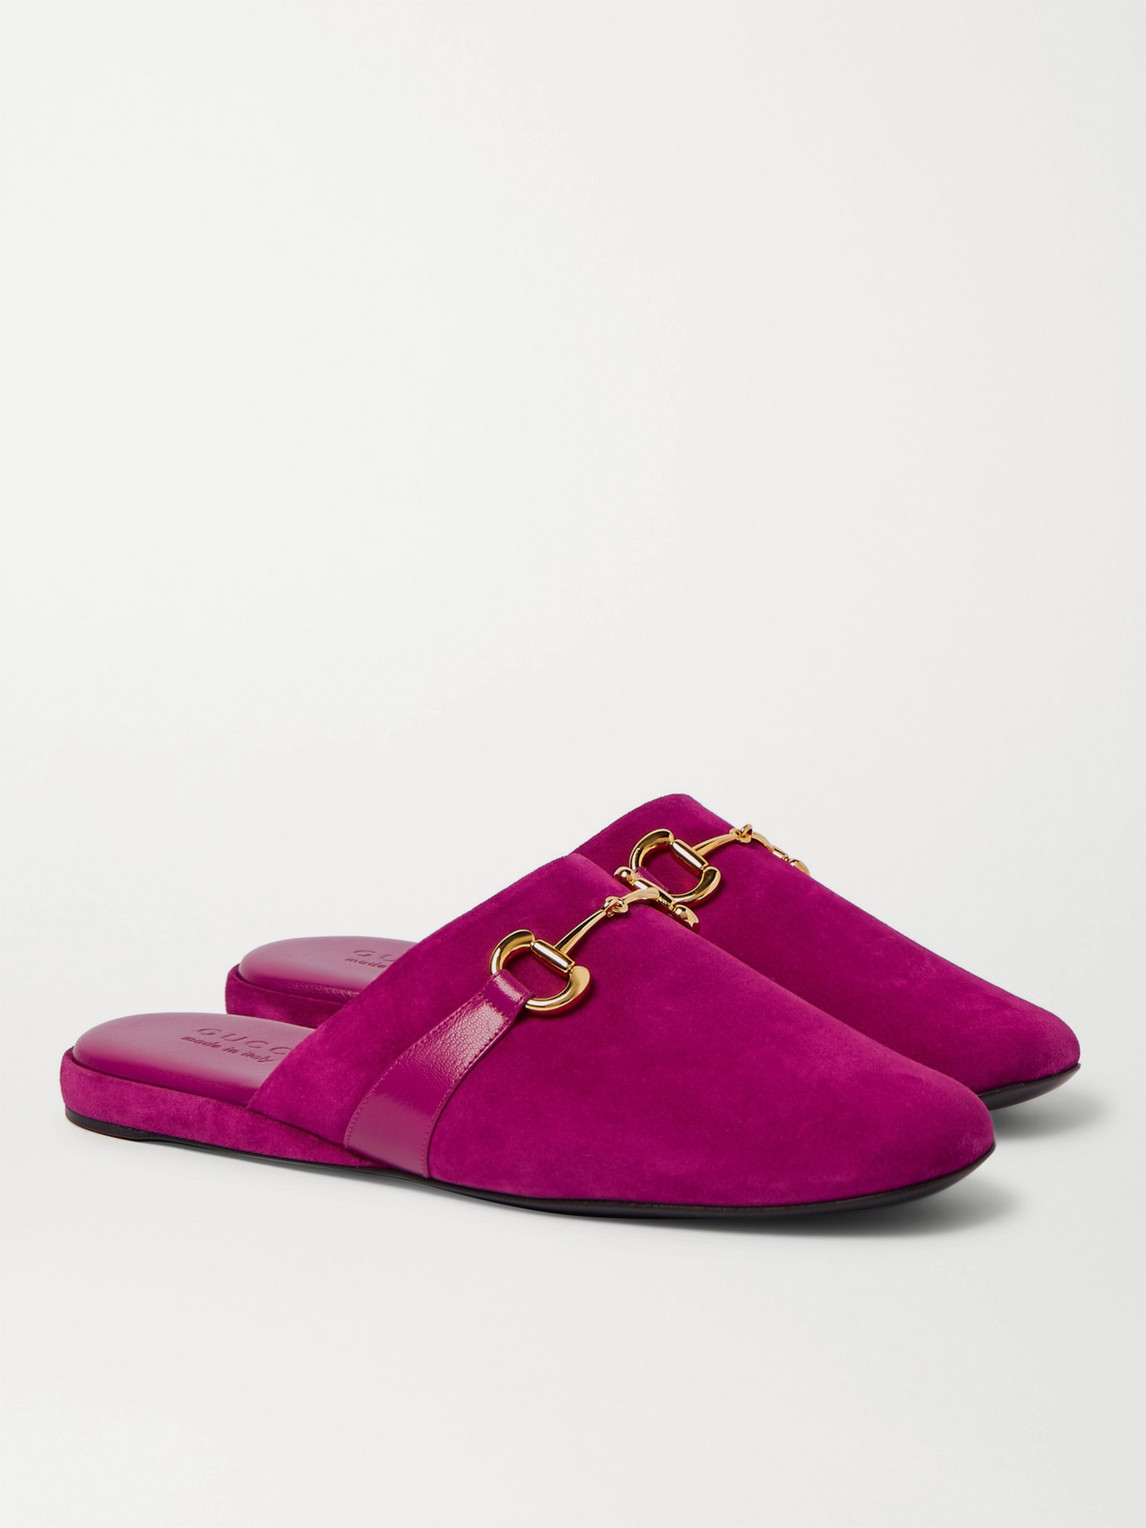 Gucci Pericle Horsebit Suede Slippers In Pink